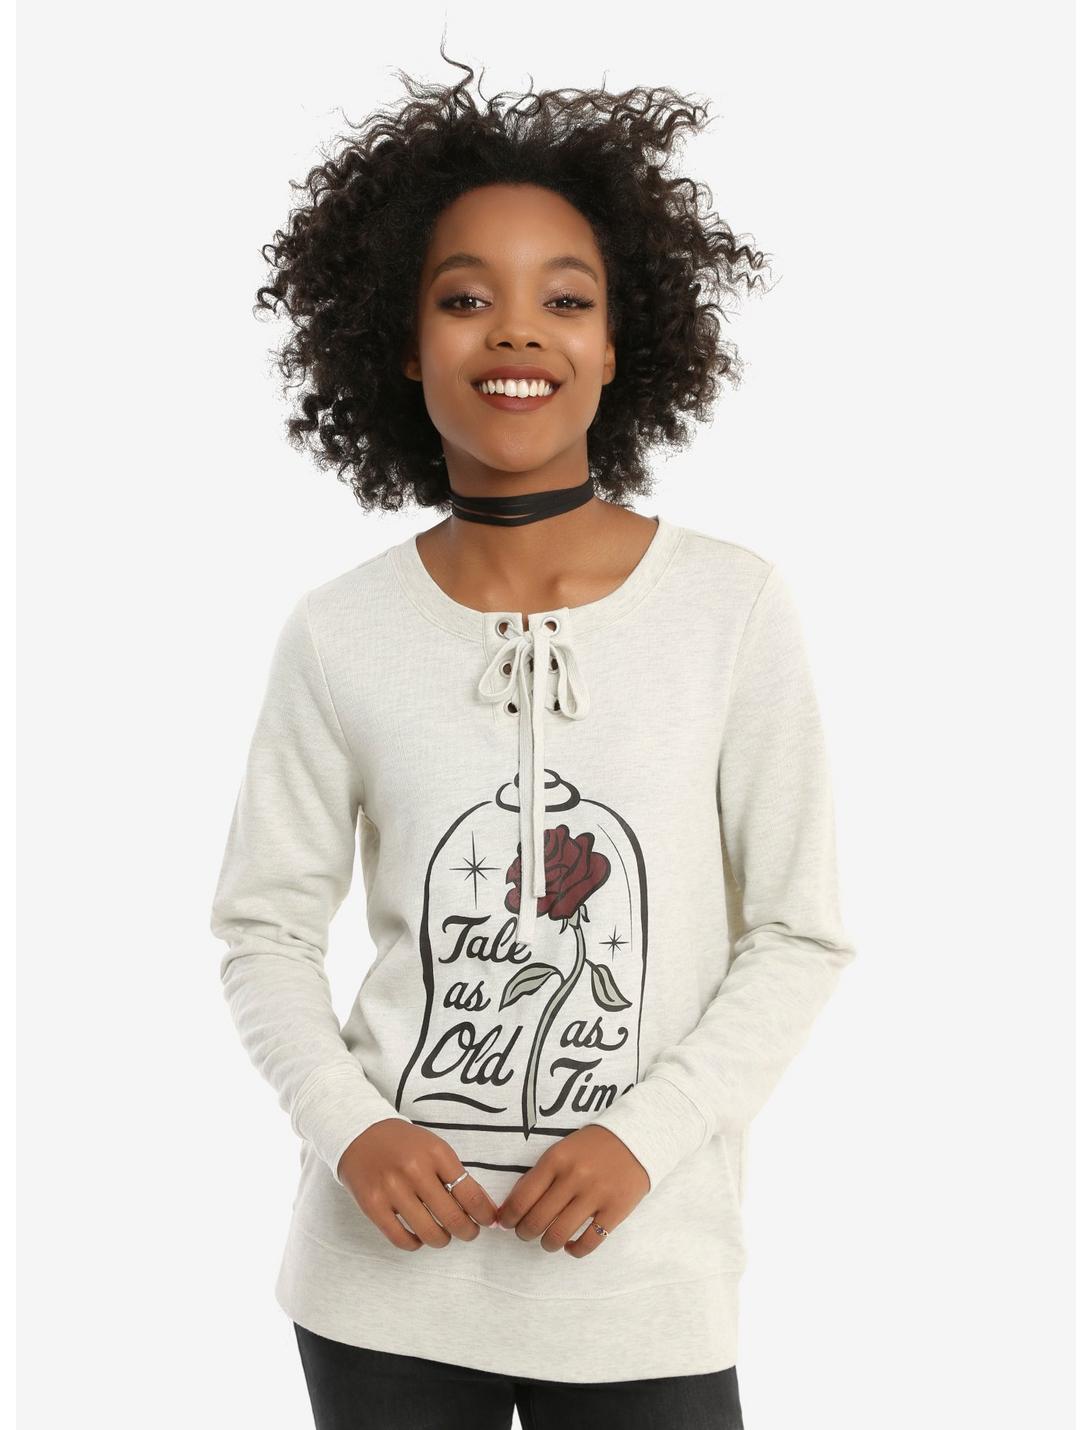 Disney Beauty And The Beast Tale As Old As Time Lace-Up Girls Sweatshirt, MULTI, hi-res